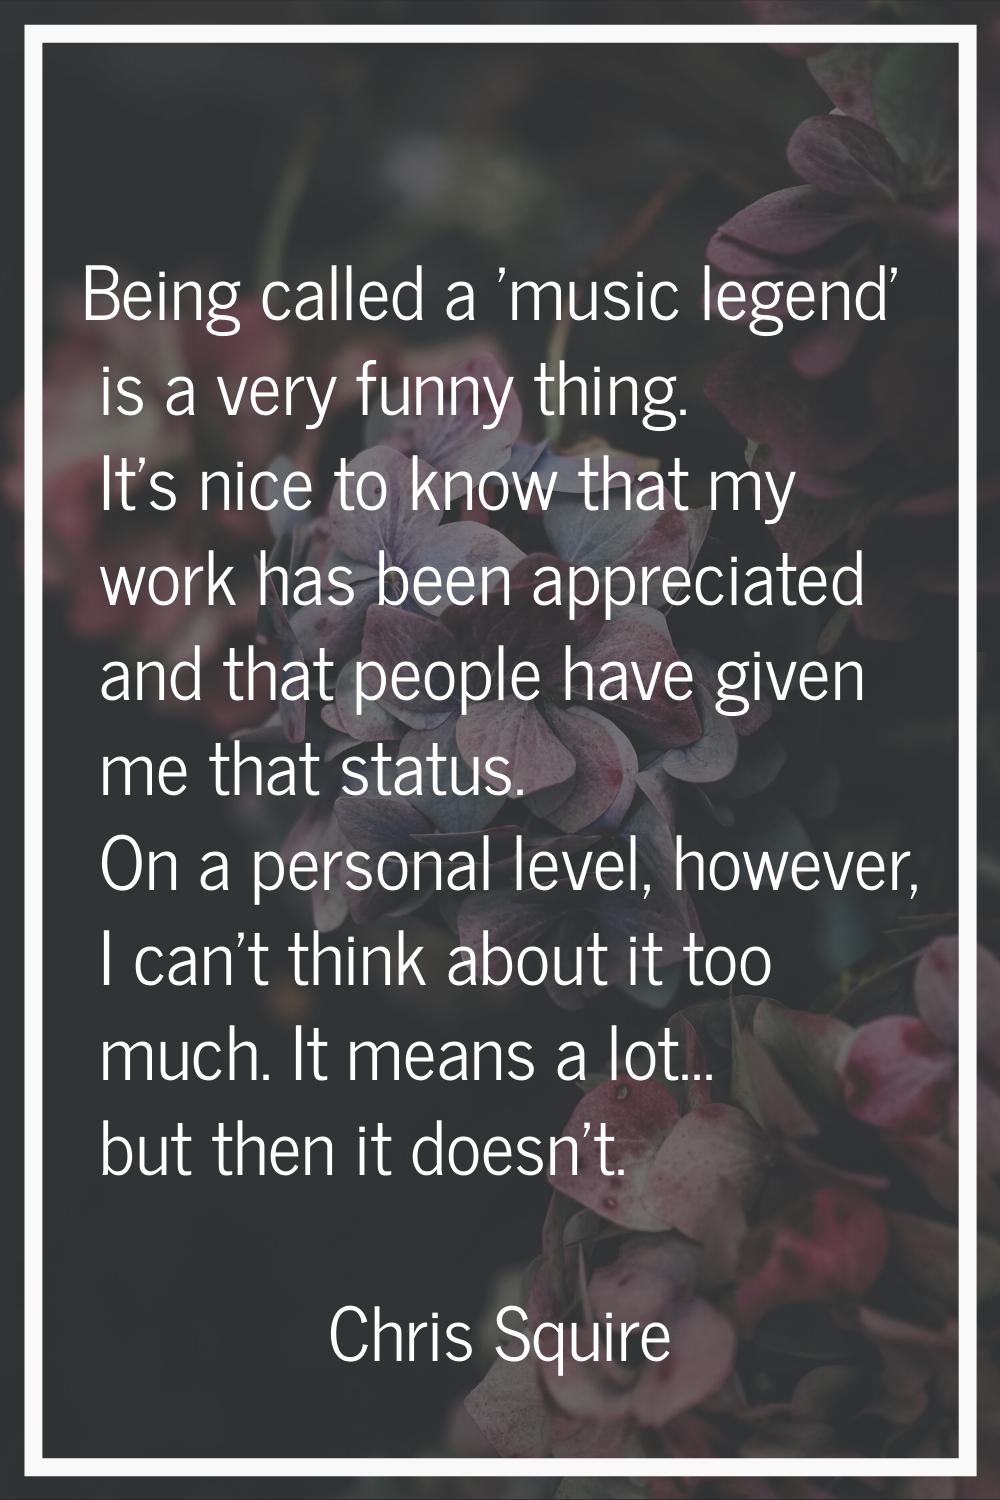 Being called a 'music legend' is a very funny thing. It's nice to know that my work has been apprec